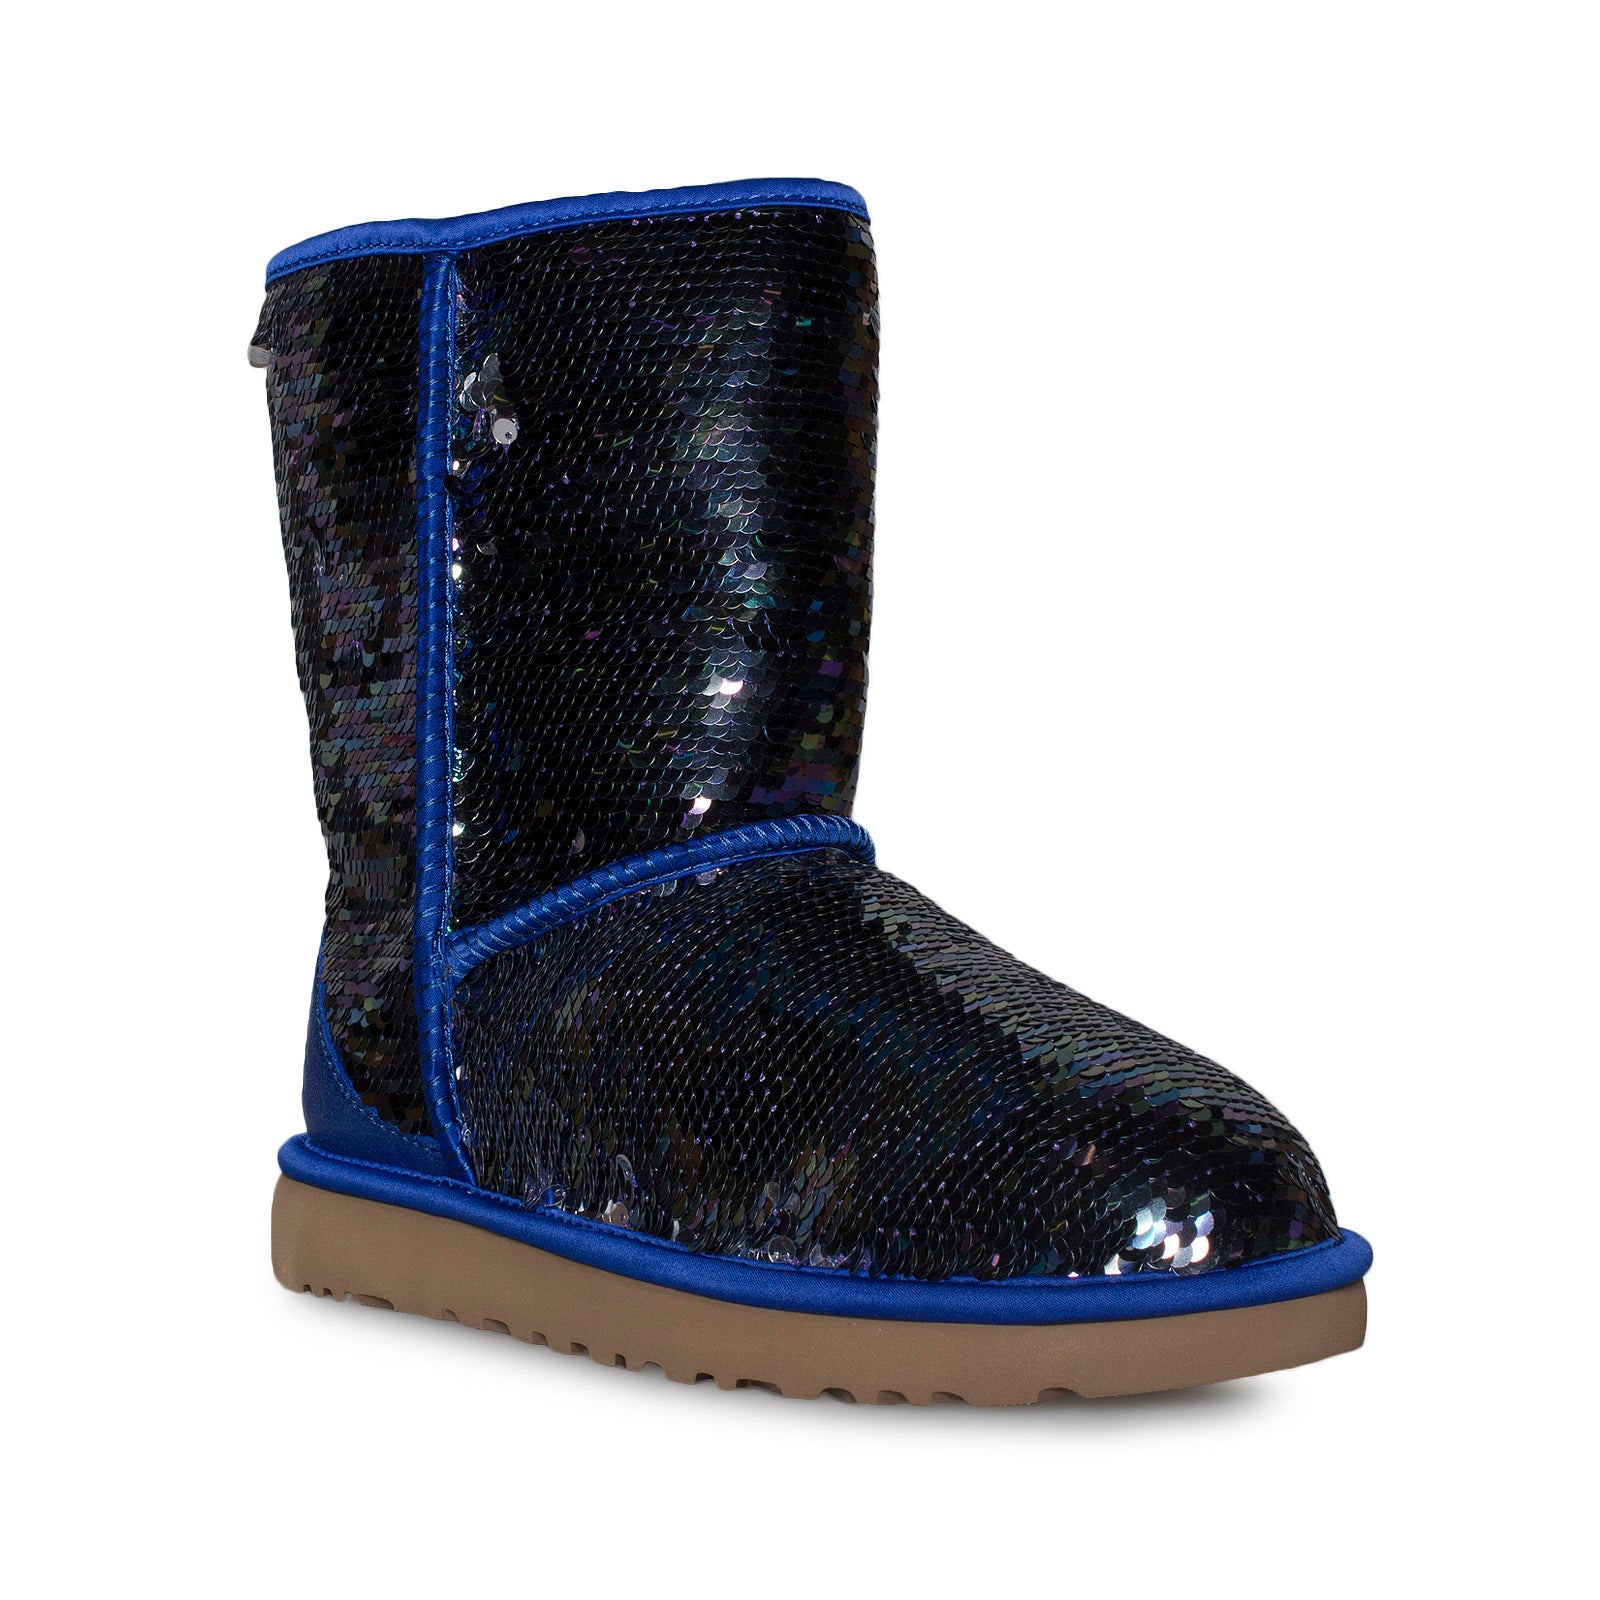 UGG Classic Short Sequin Navy Boots - Women's - MyCozyBoots